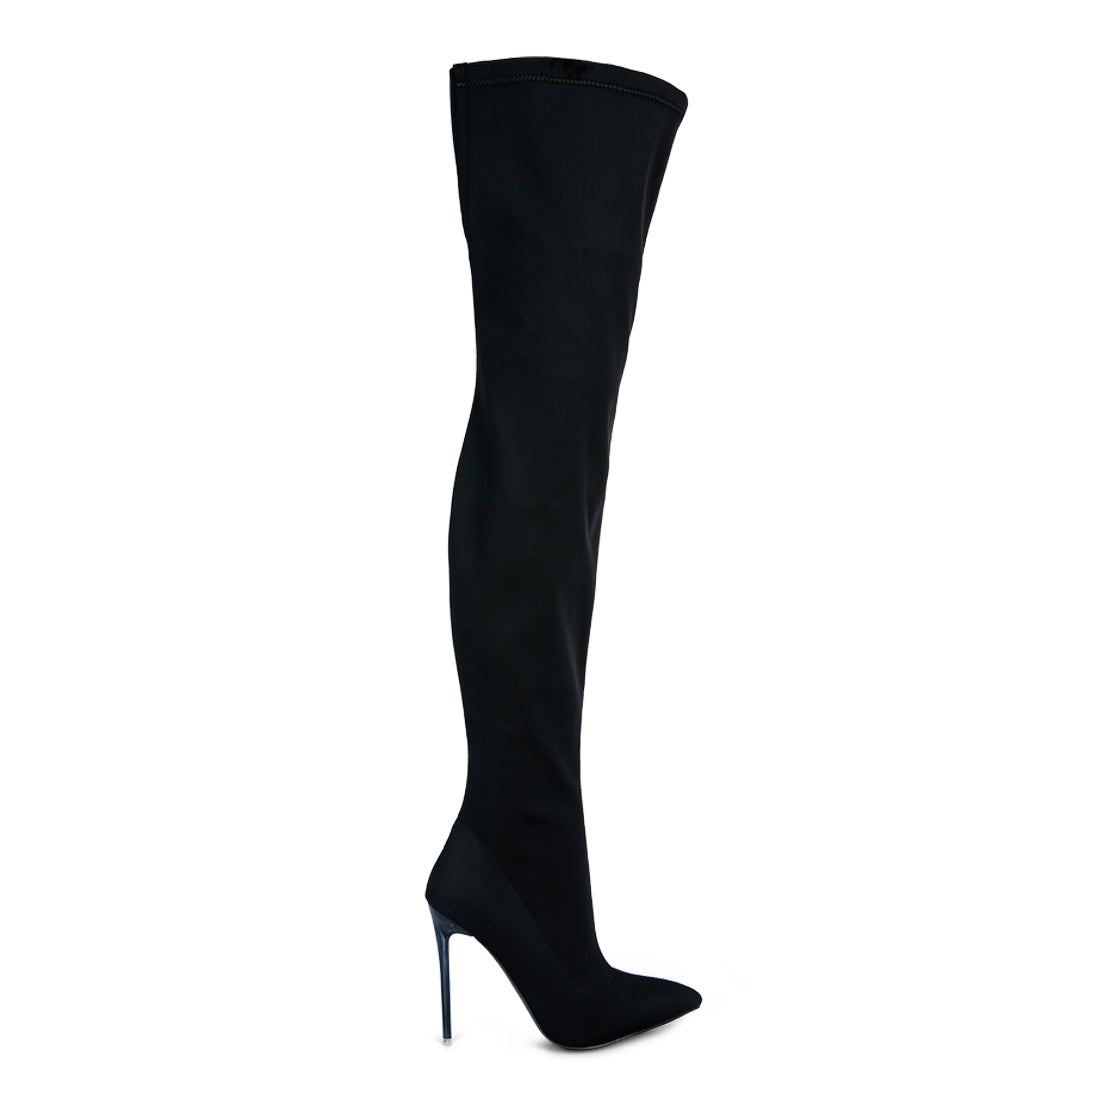 Buy RSVP by Nykaa Fashion Black Knee Length Block Heel Boots Online